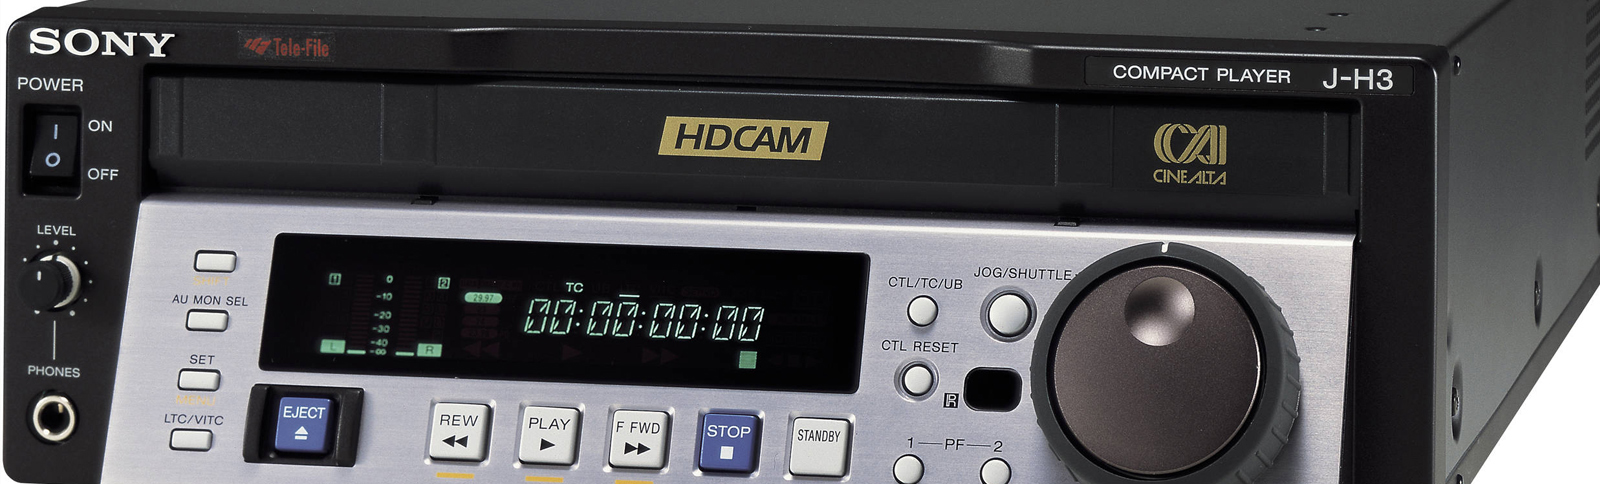 HDcam pro res transfer services in oxfordshire uk